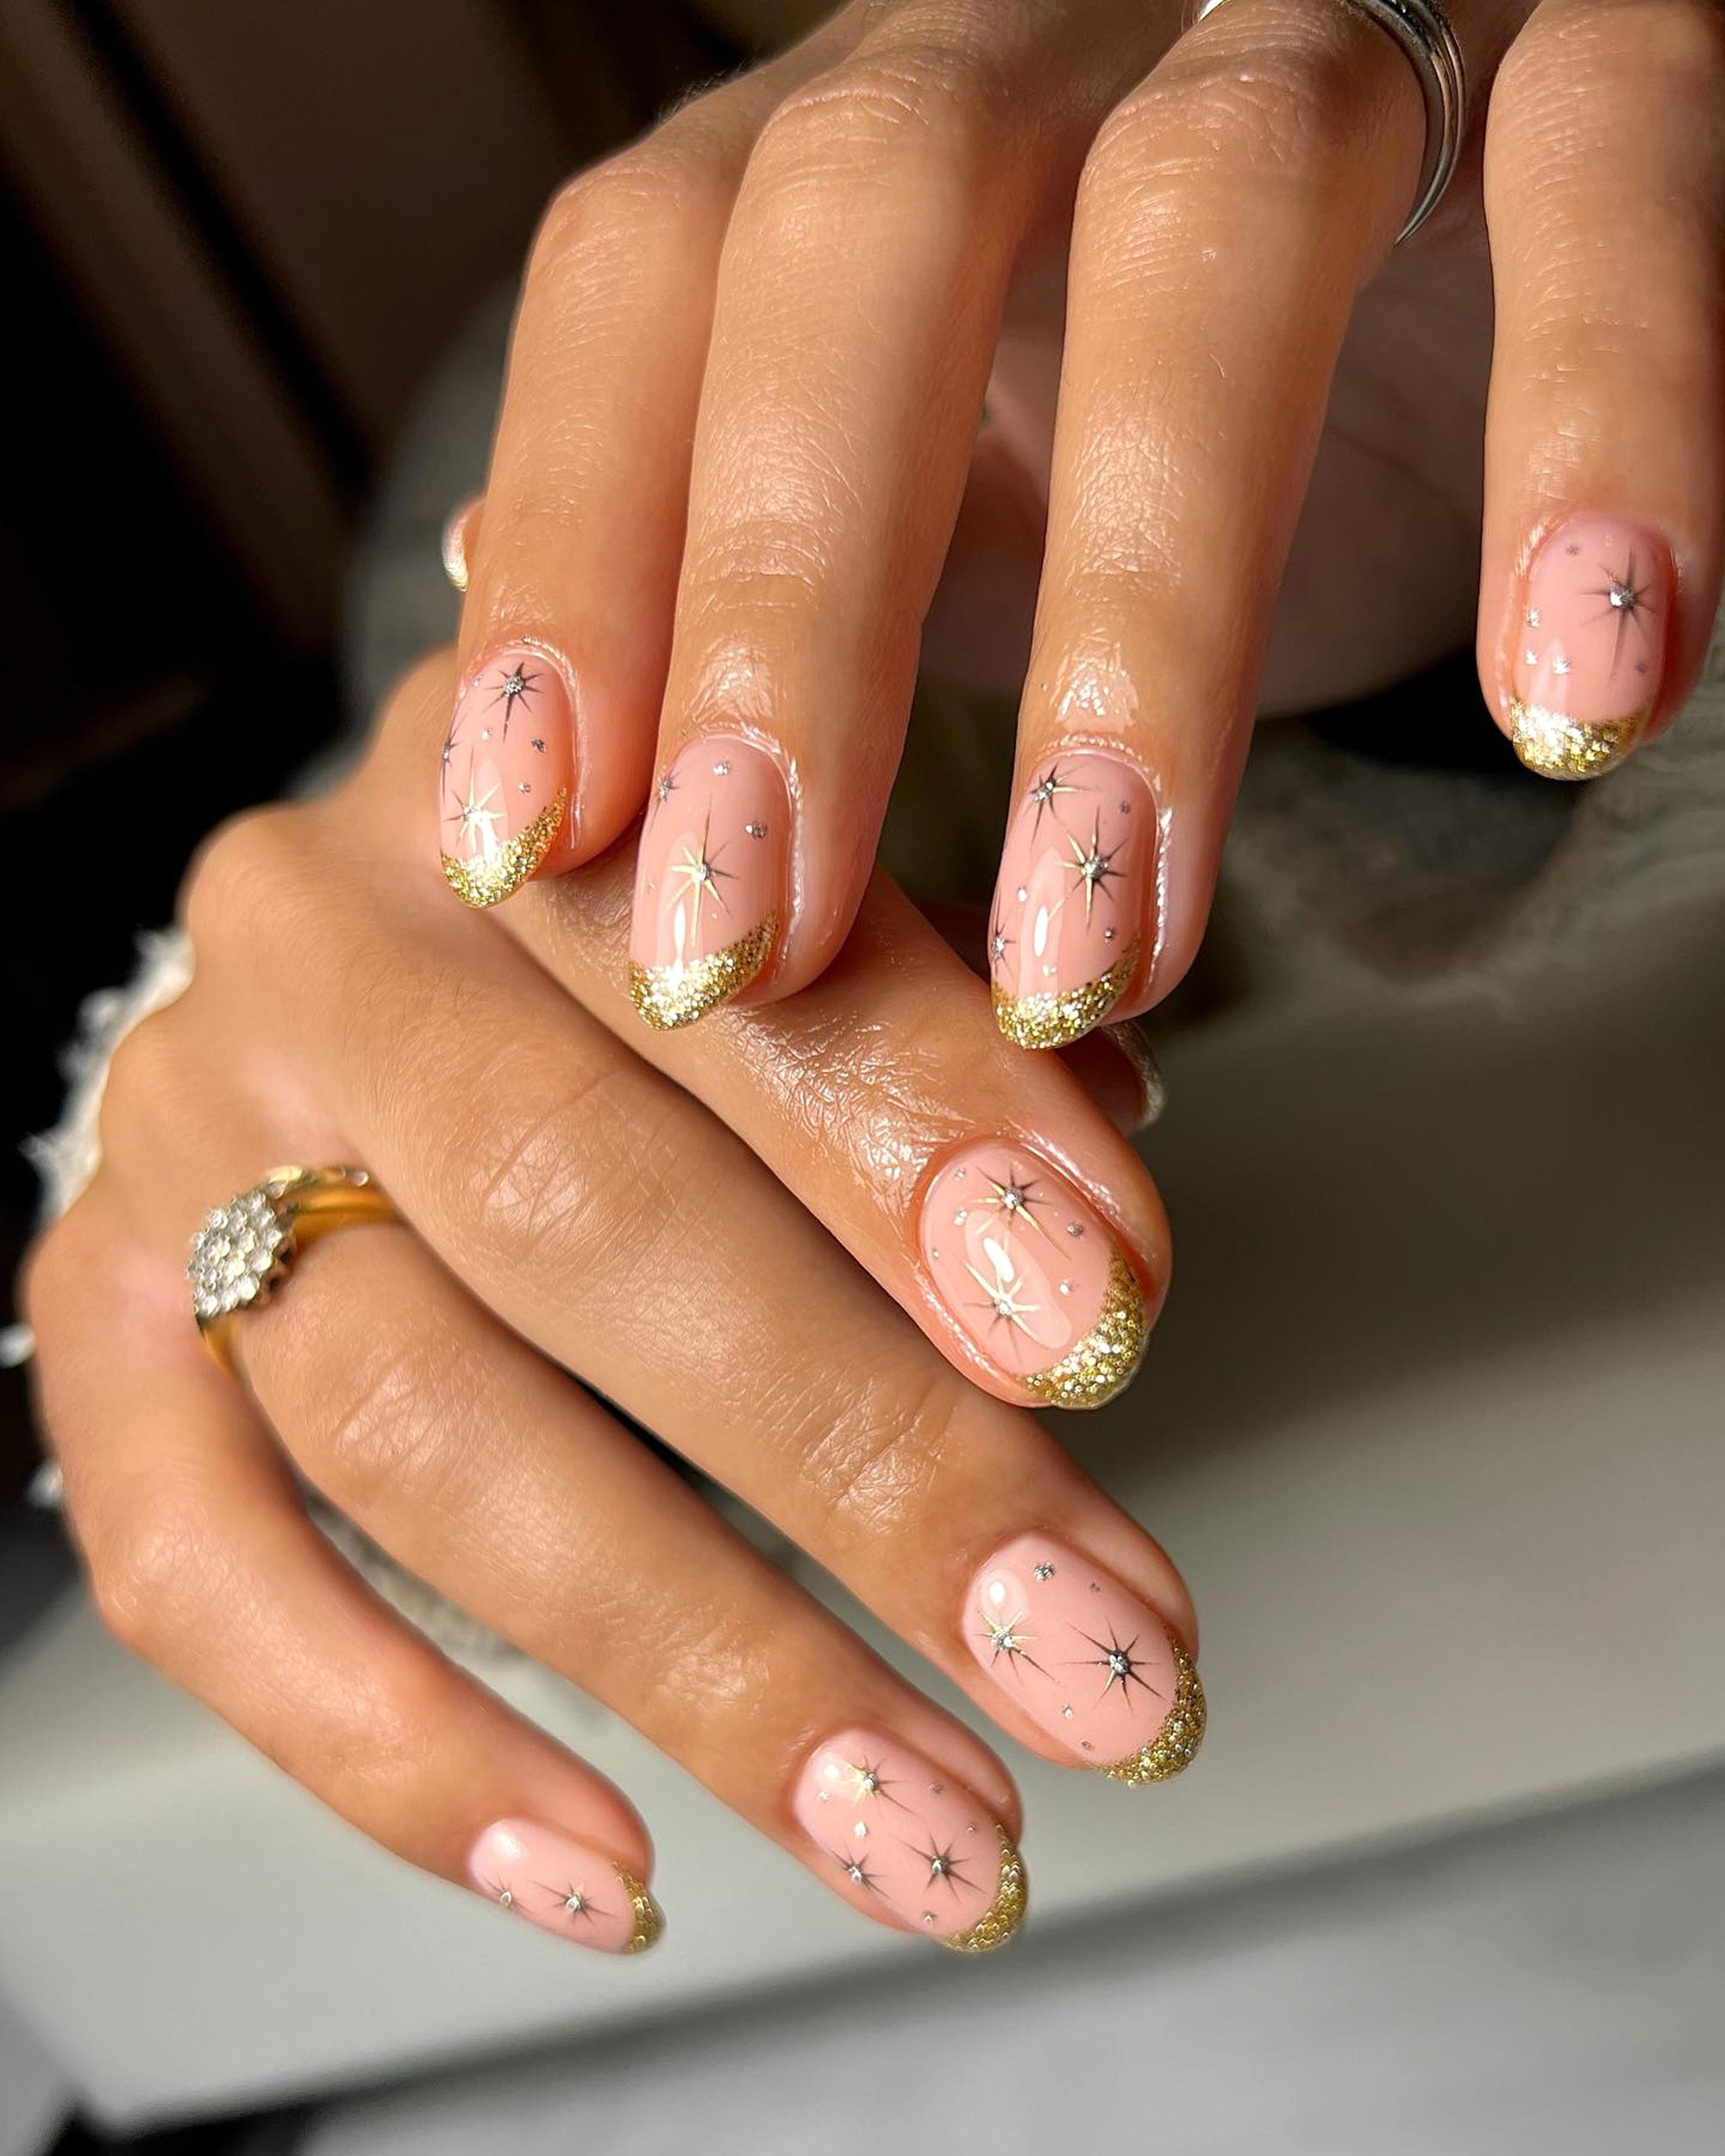 5 Benefits of a Structured Overlay Manicure | Nailpro